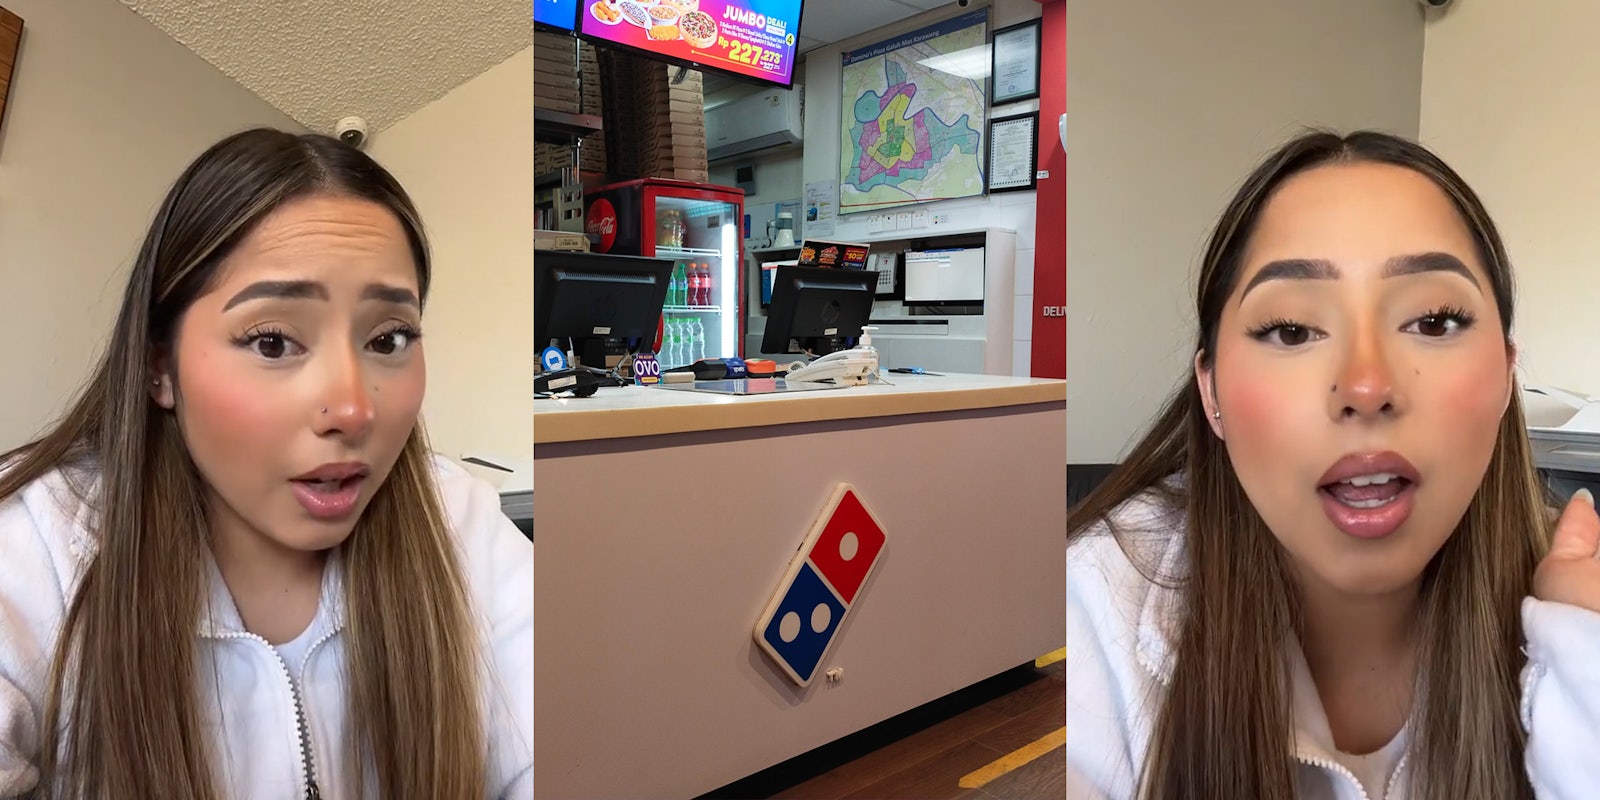 worker speaking in front of tan walls (l) Domino's interior with cash registers and sign (c) worker speaking in front of tan walls (r)